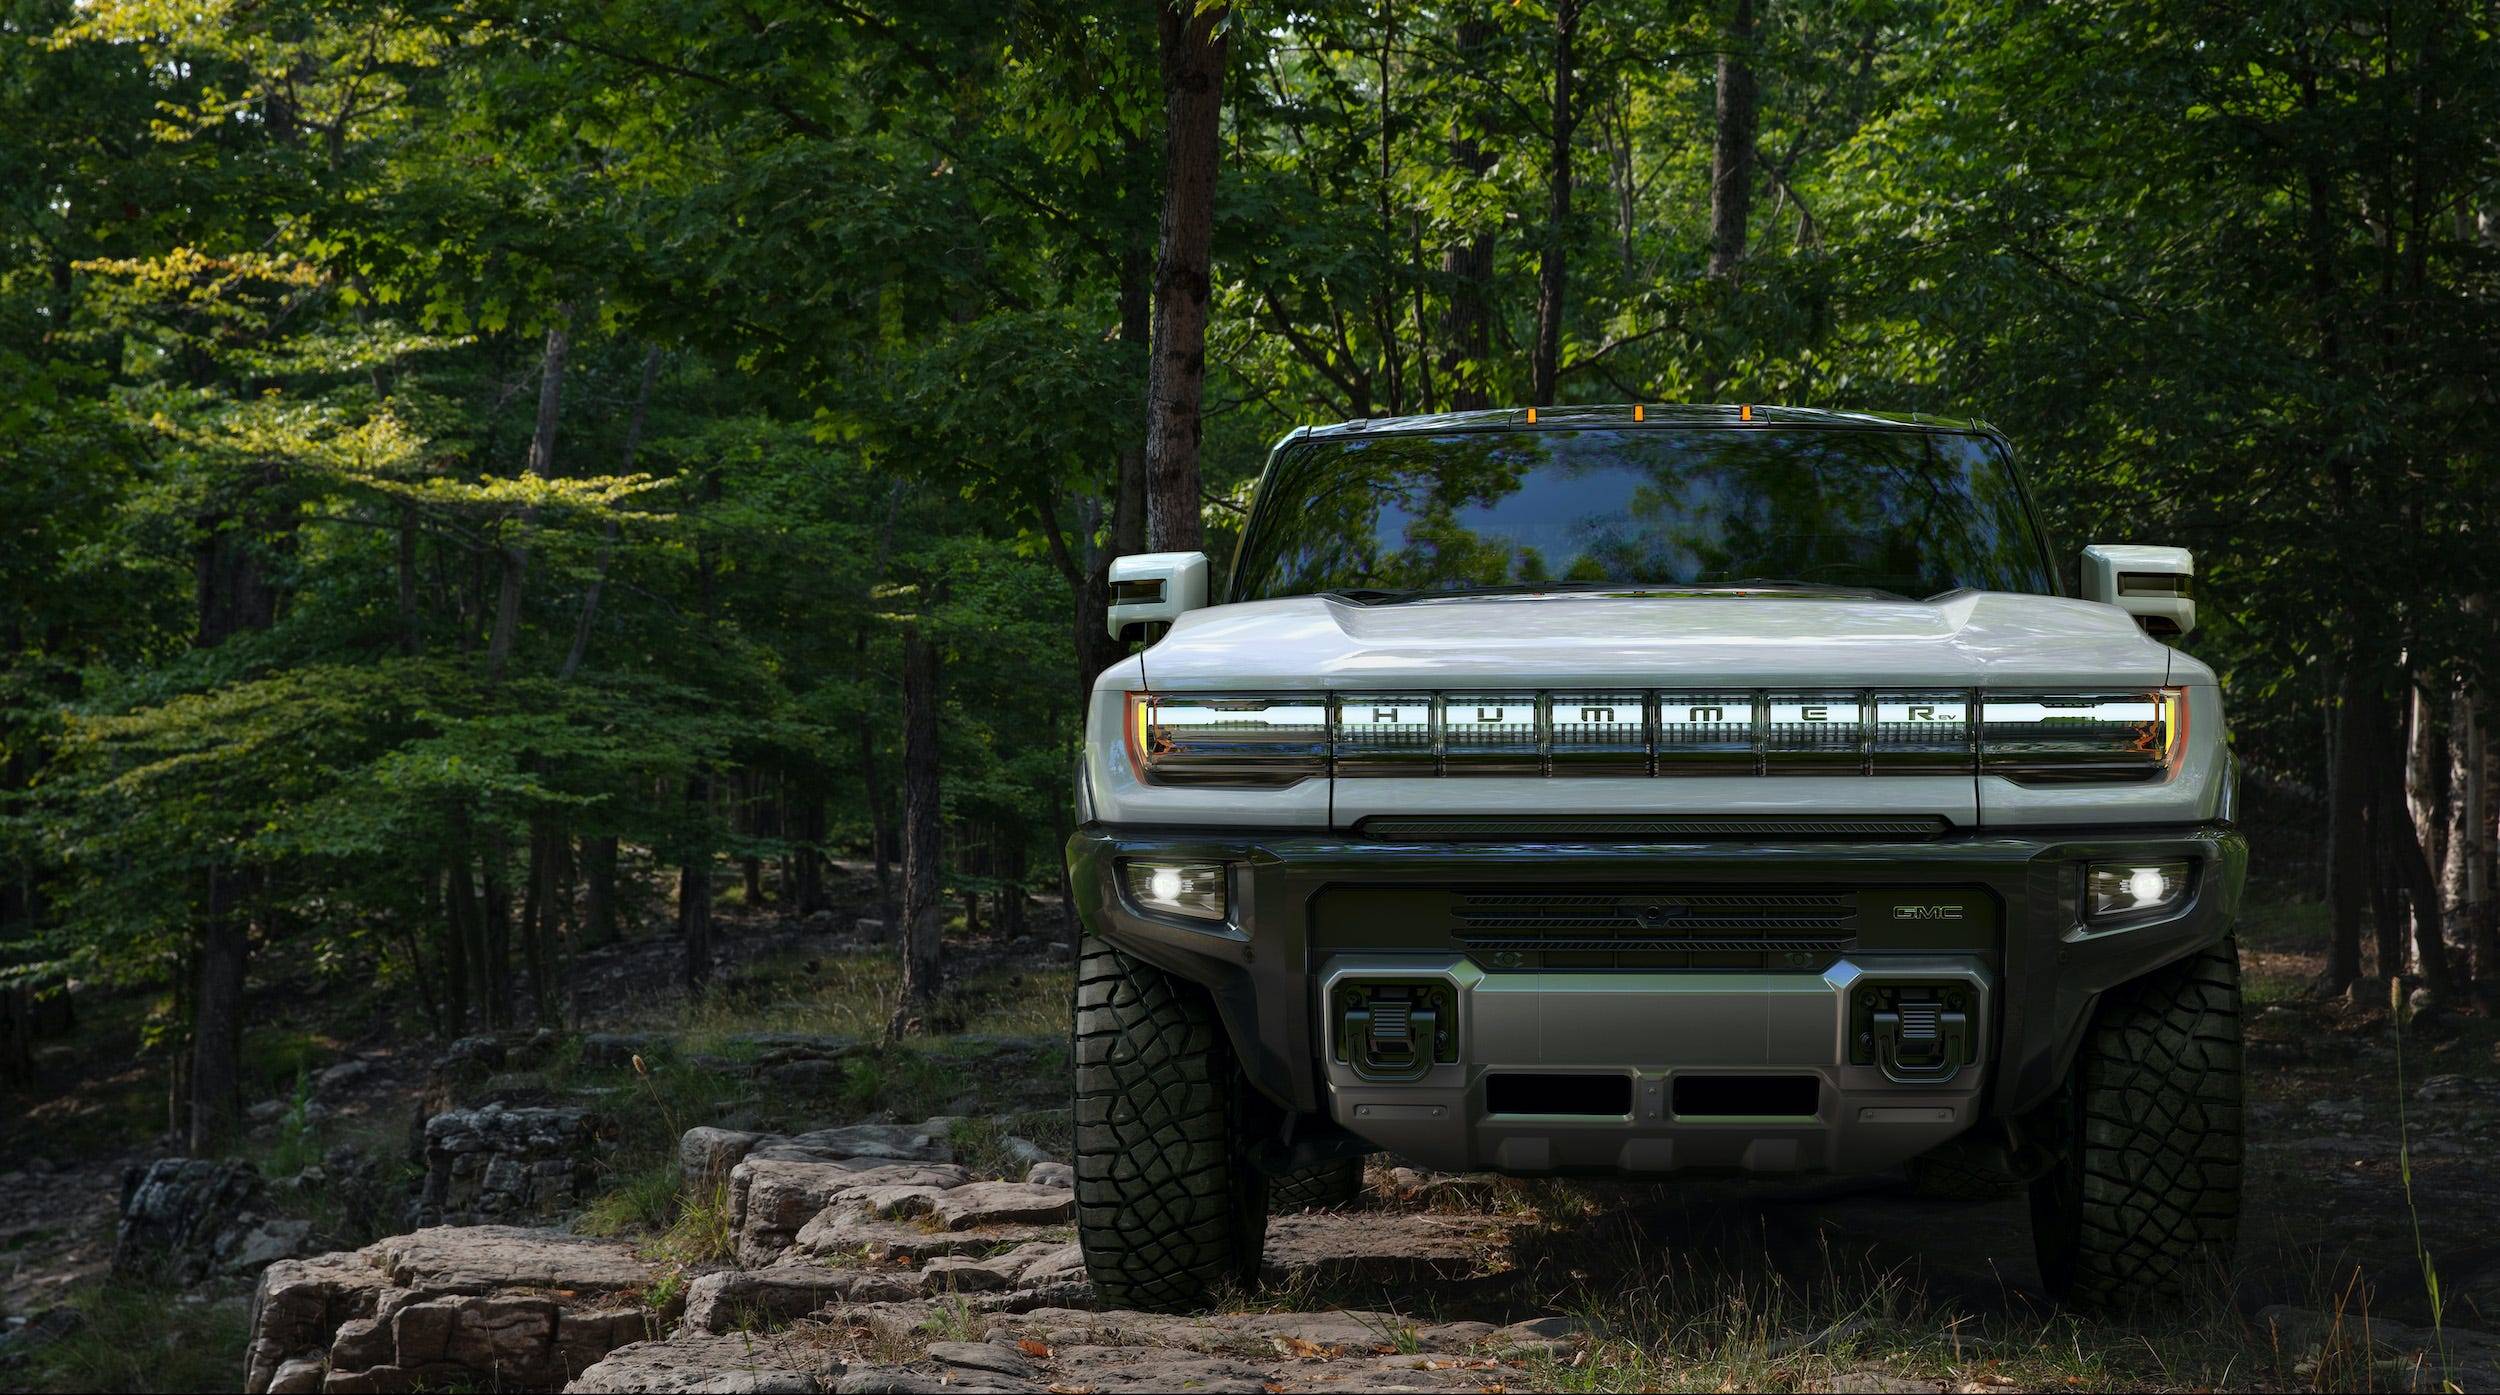 the-new-gmc-hummer-ev-is-aimed-directly-at-the-heart-of-traditional-gas-guzzling-pickup-truck-buyers.jpg?imgsize=567628